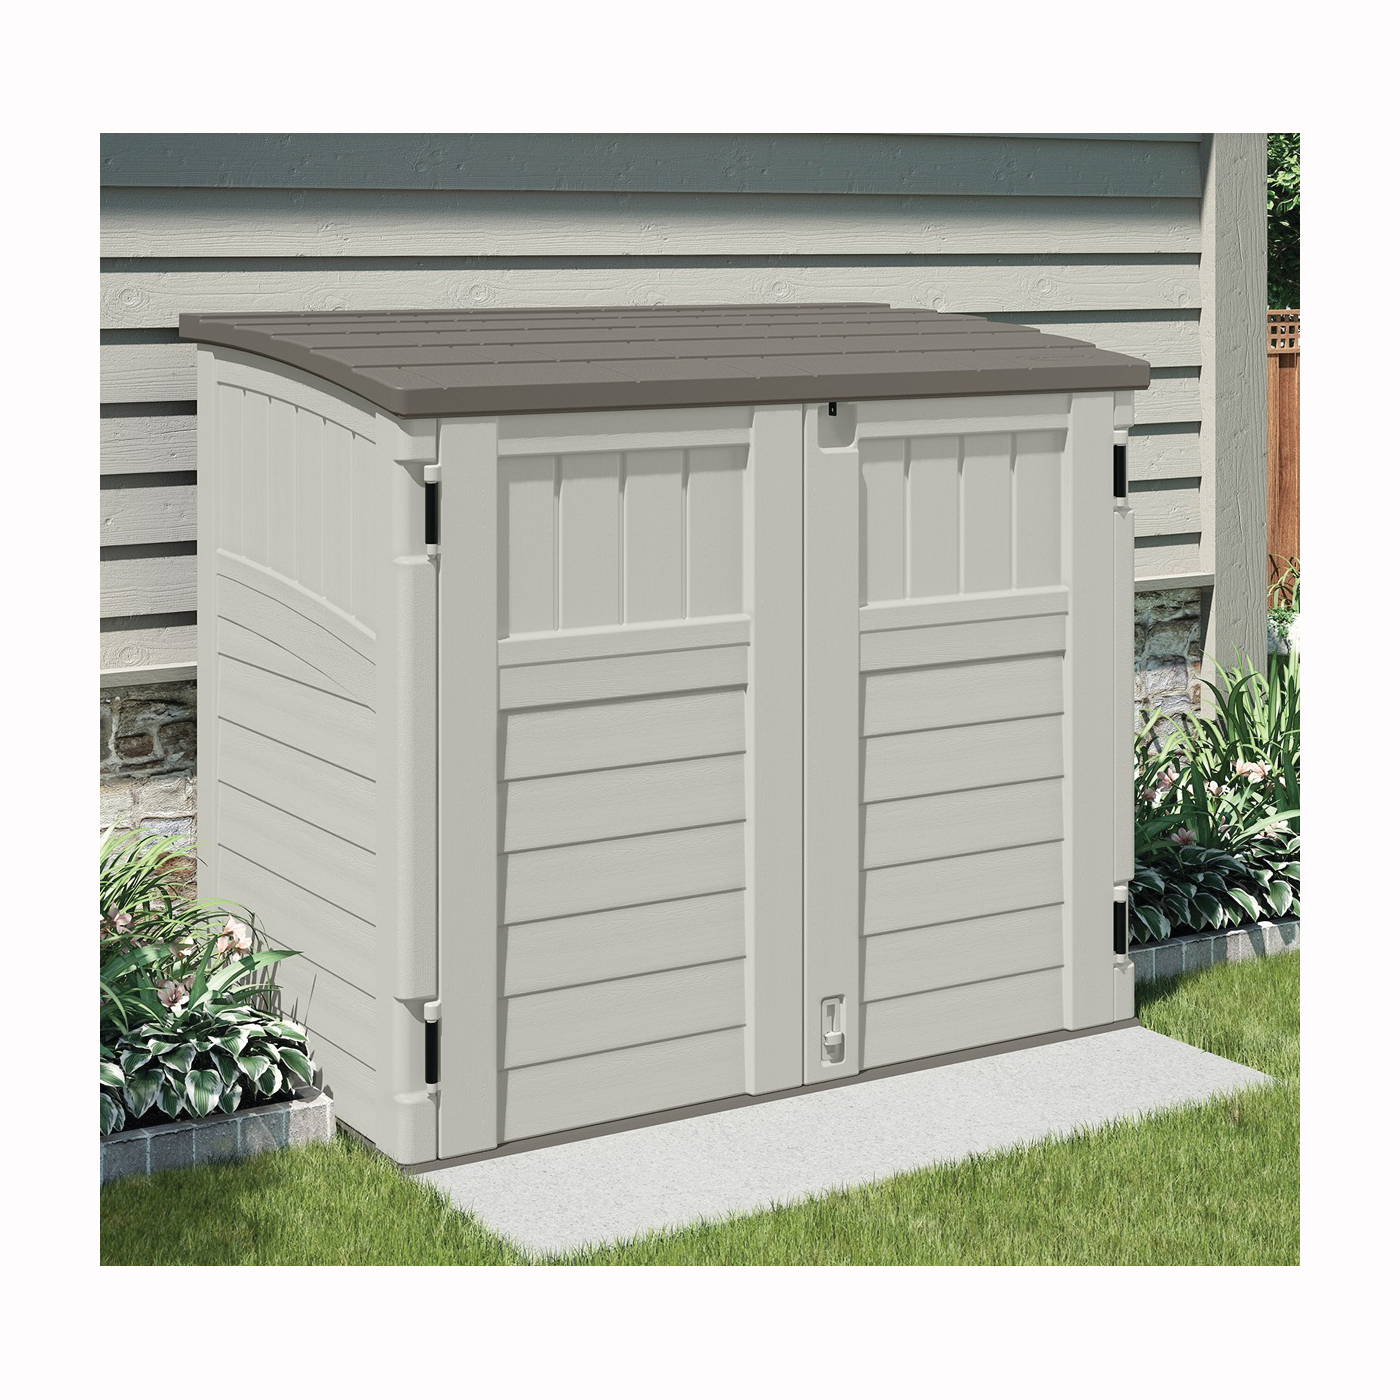 Suncast Stow-Away BMS2500 Storage Shed, 34 cu-ft Capacity, 4 ft 5 in W, 2 ft 8-1/4 in D, 3 ft 9-1/2 in H, Resin - 3